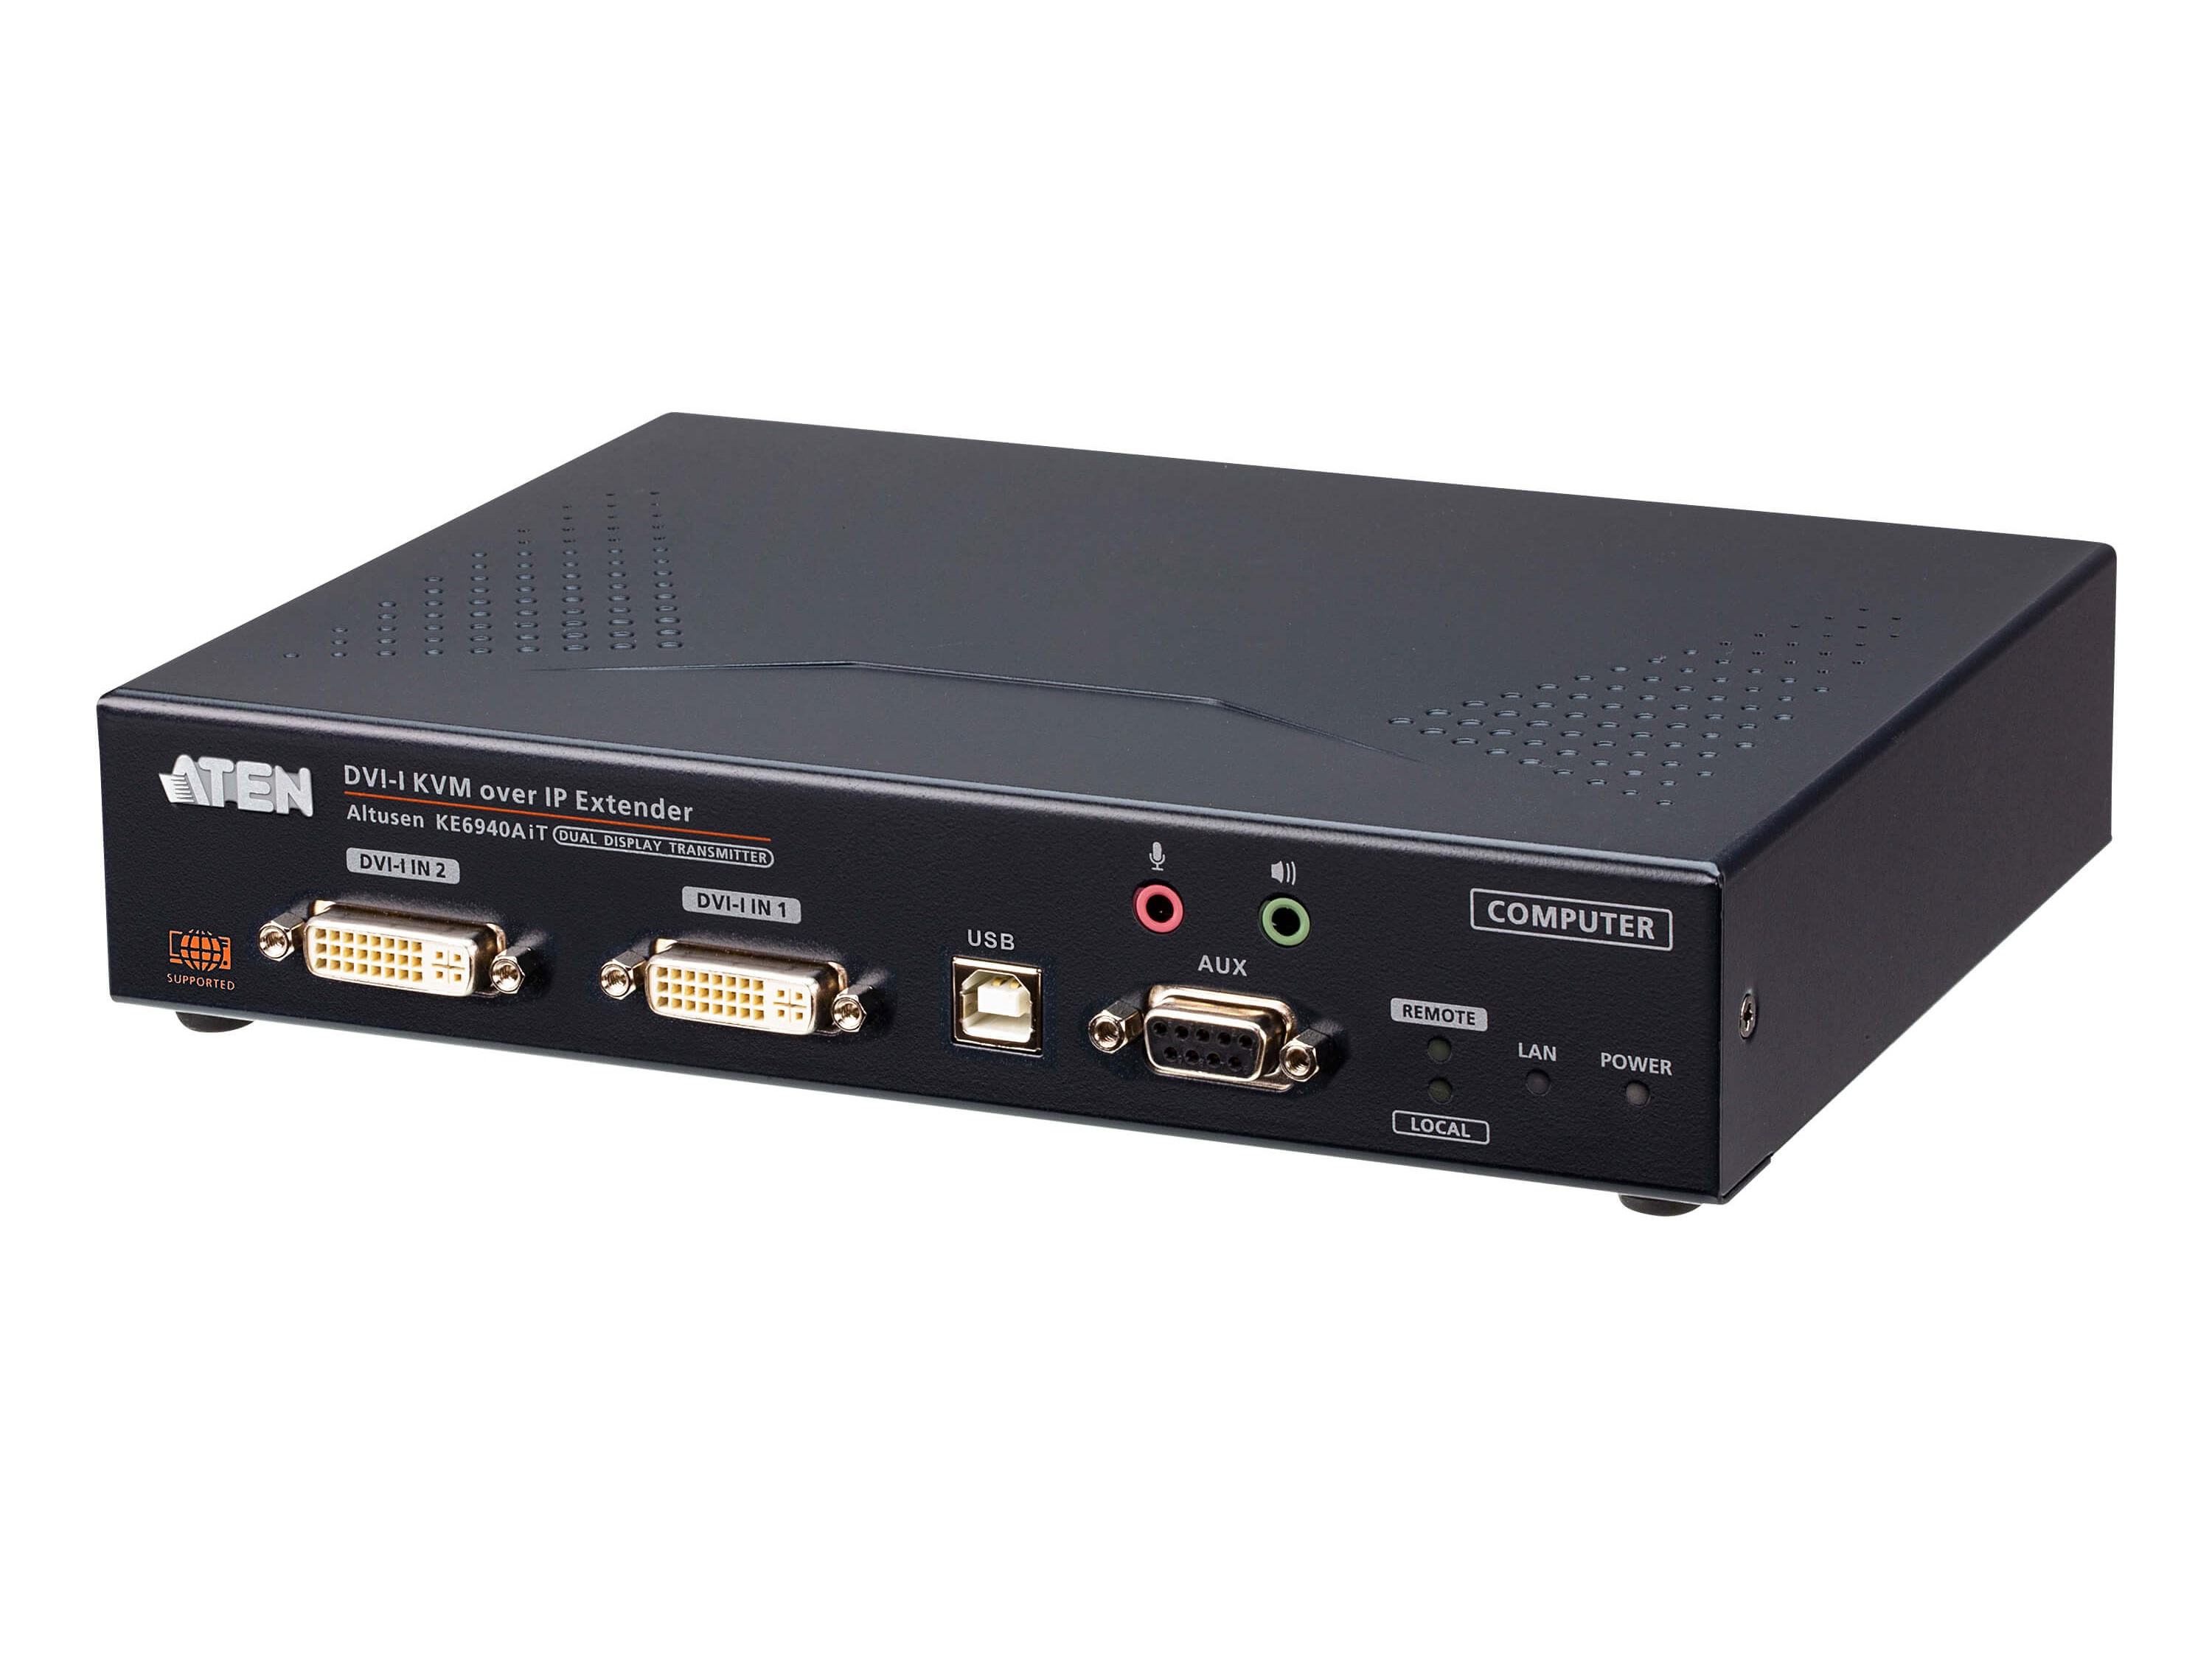 KE6940AIT DVI-I Dual Display KVM over IP Transmitter with Internet Access by Aten